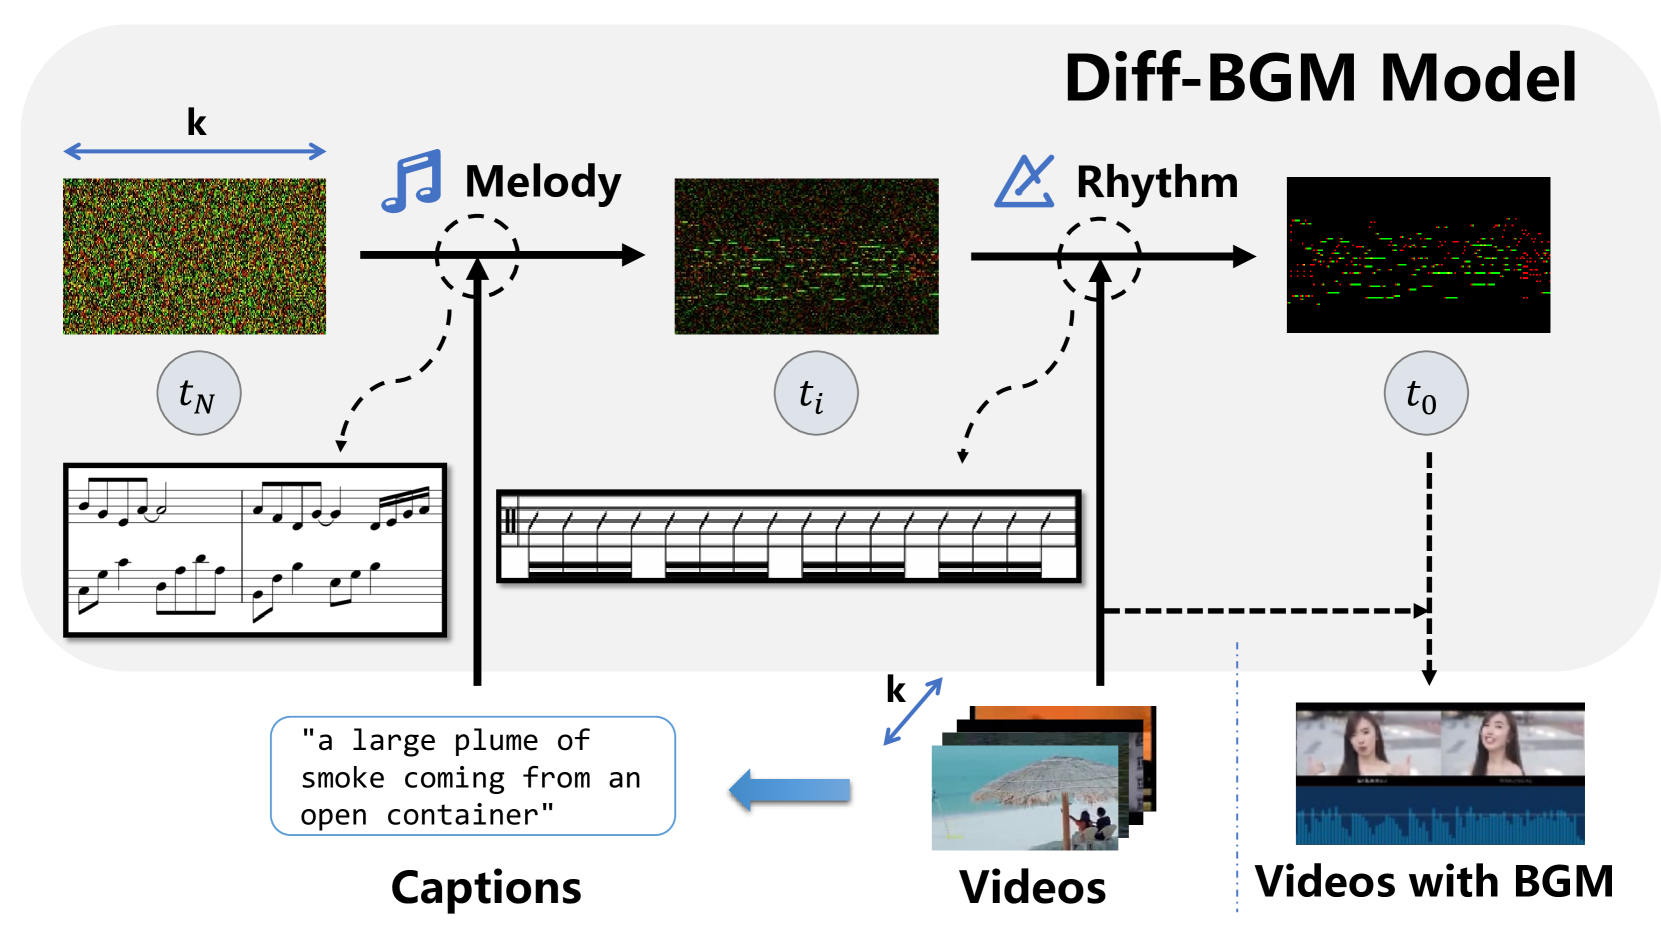 Diff-BGM: A Diffusion Model for Video Background Music Generation